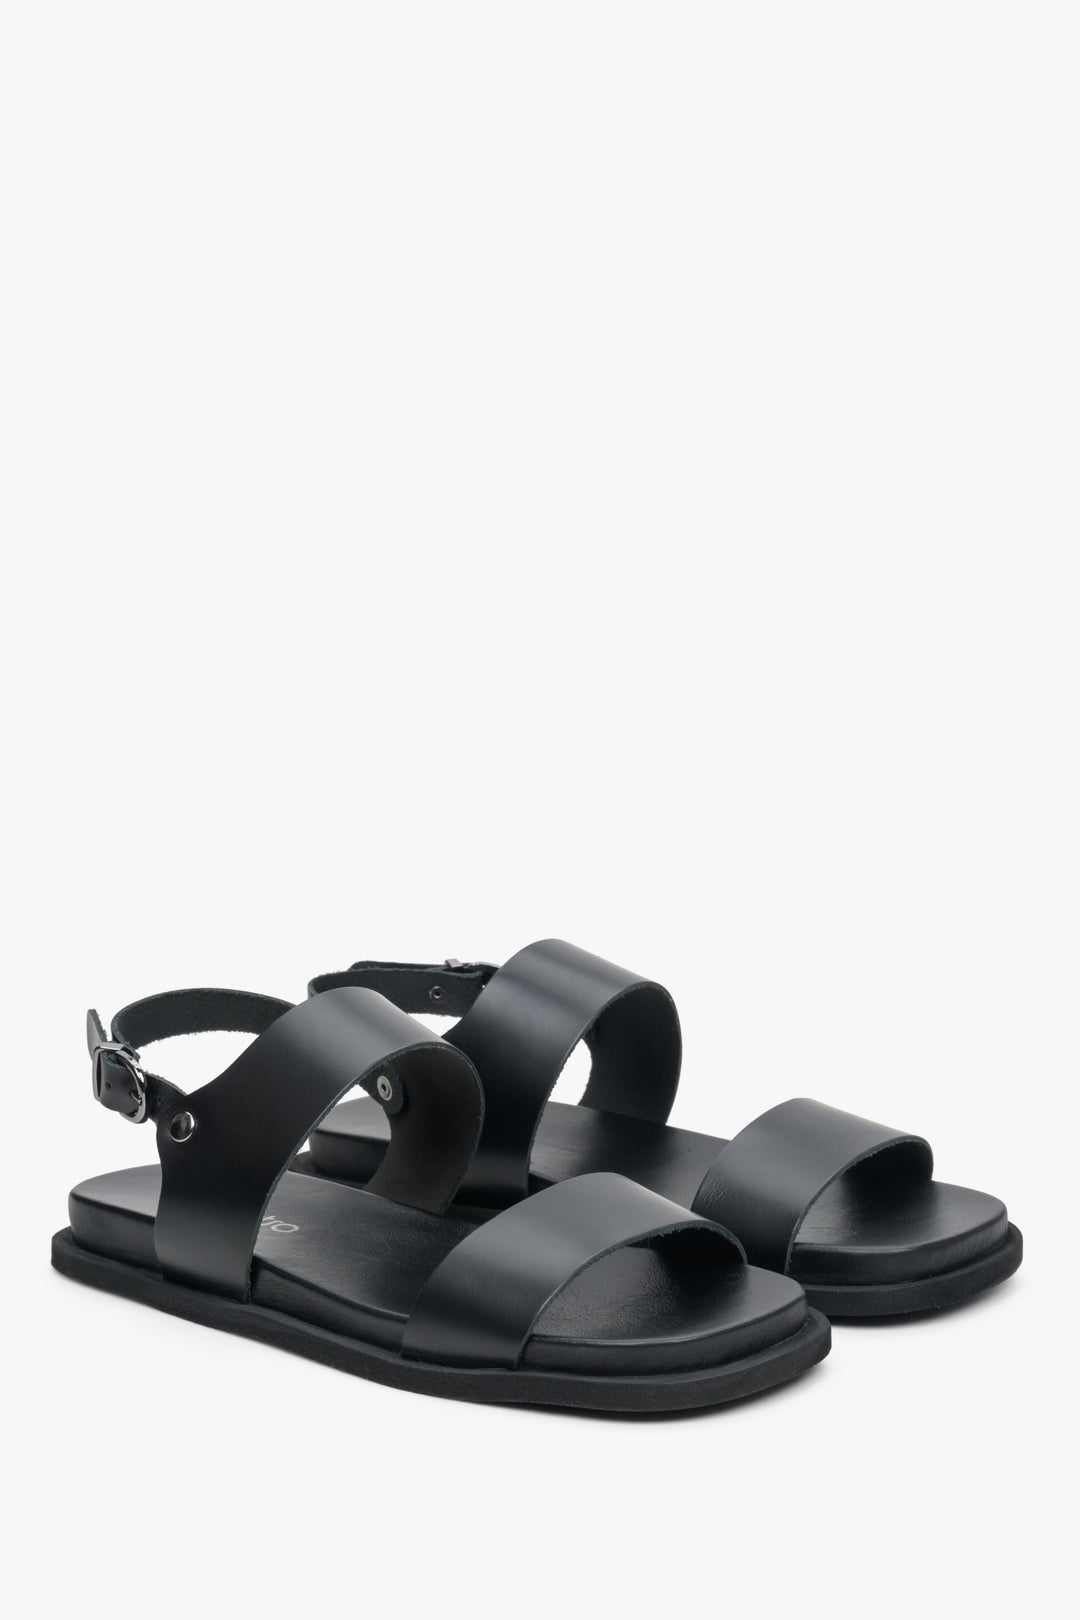 Women's black sandals on a black flat sole made of natural leather Estro.